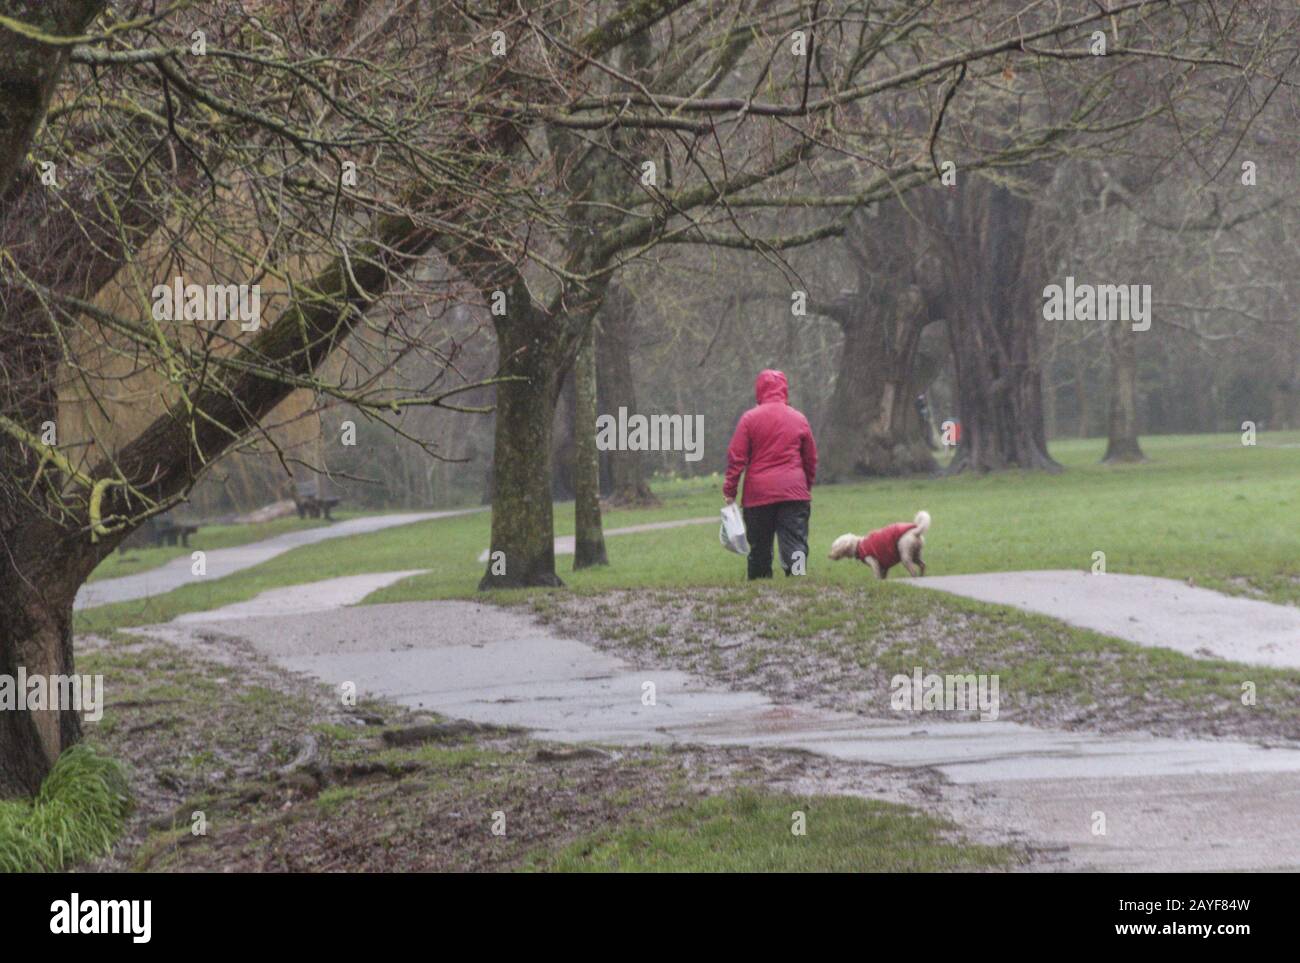 Sidmouth, Devon, 15th February 2020. Despite the driving rain and gale foce winds, people were still out and about walking the dog in the Byes, Sidmouth, Devon. Credit: Photo Central/Alamy Live News Stock Photo